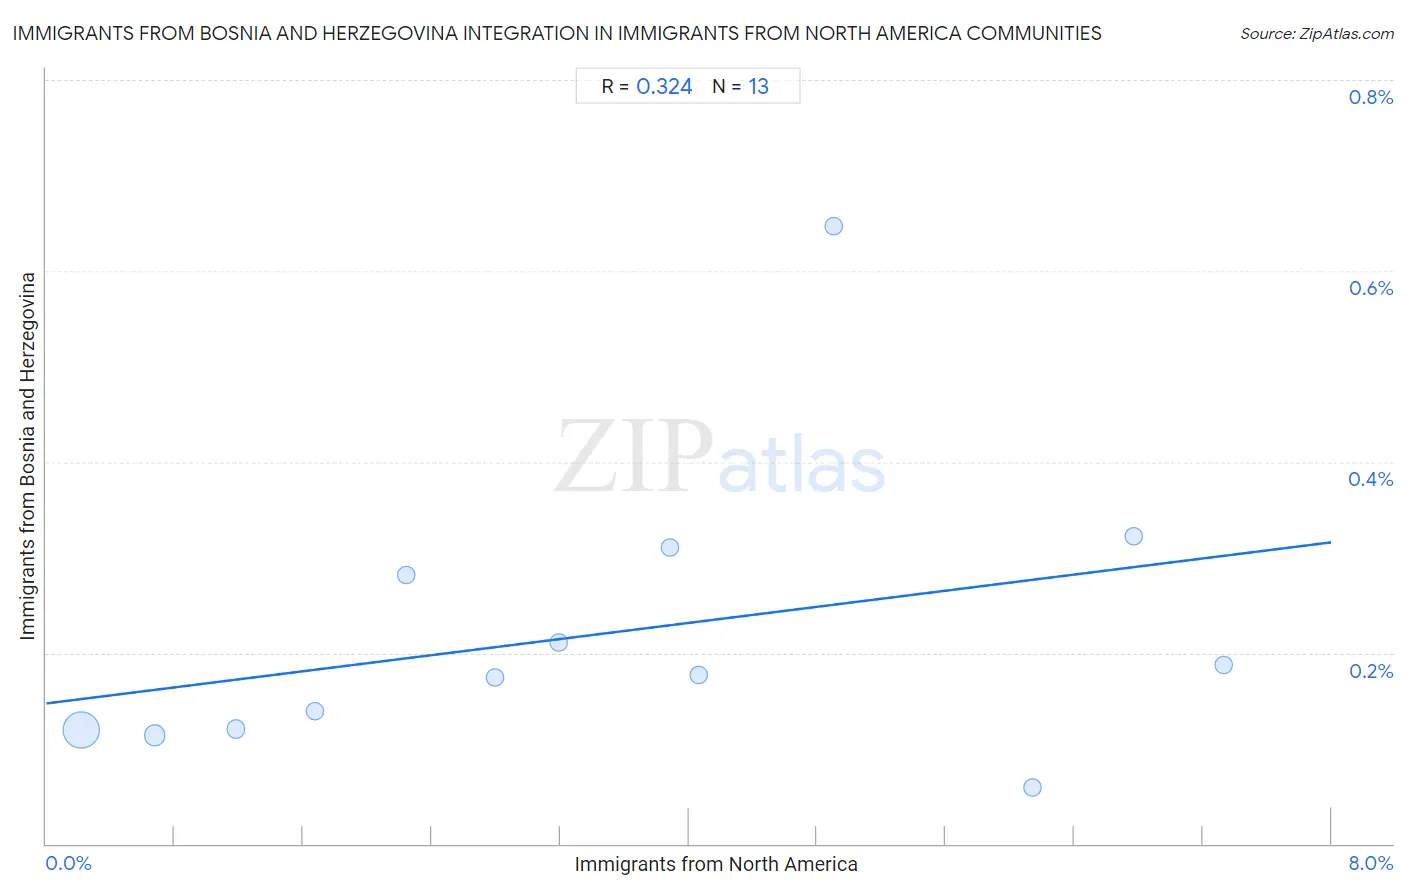 Immigrants from North America Integration in Immigrants from Bosnia and Herzegovina Communities